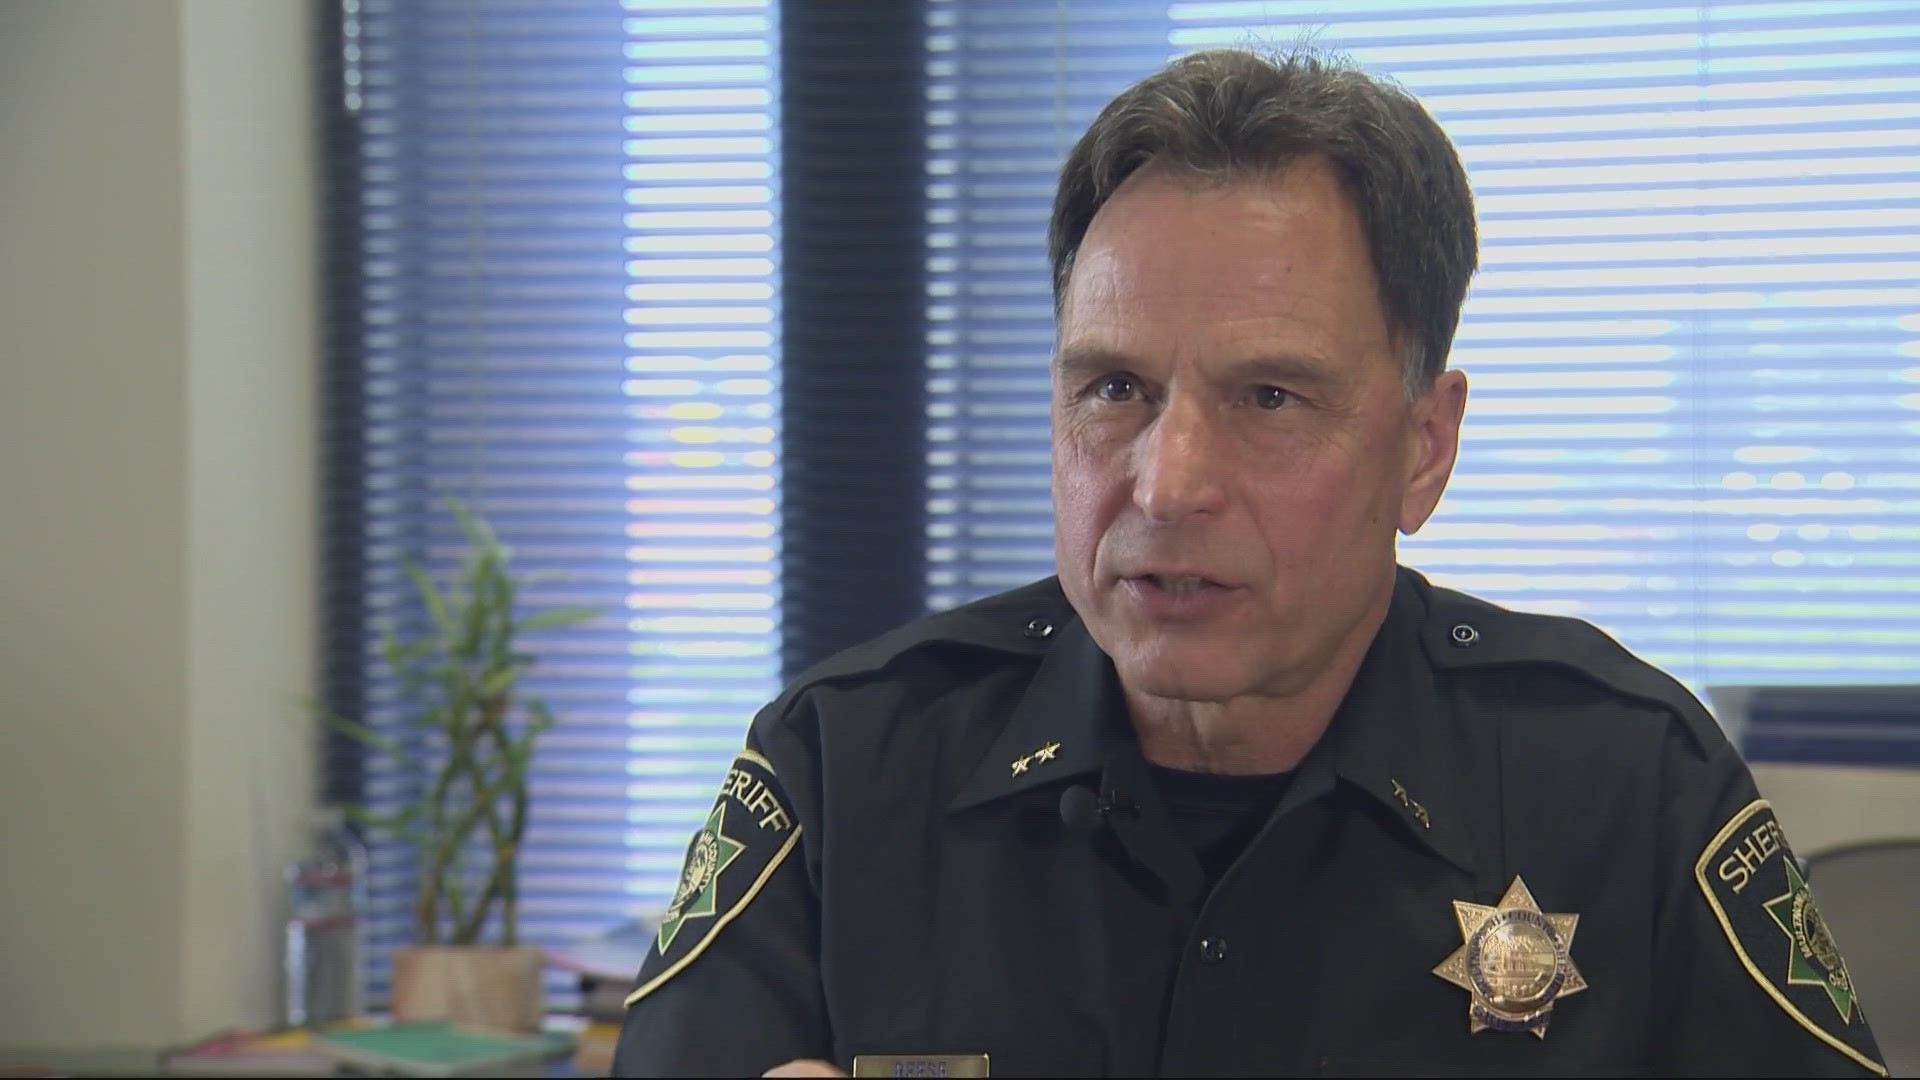 The former Multnomah County sheriff and Portland Police chief, Mike Reese, was appointed by Gov. Tina Kotek to head the agency.